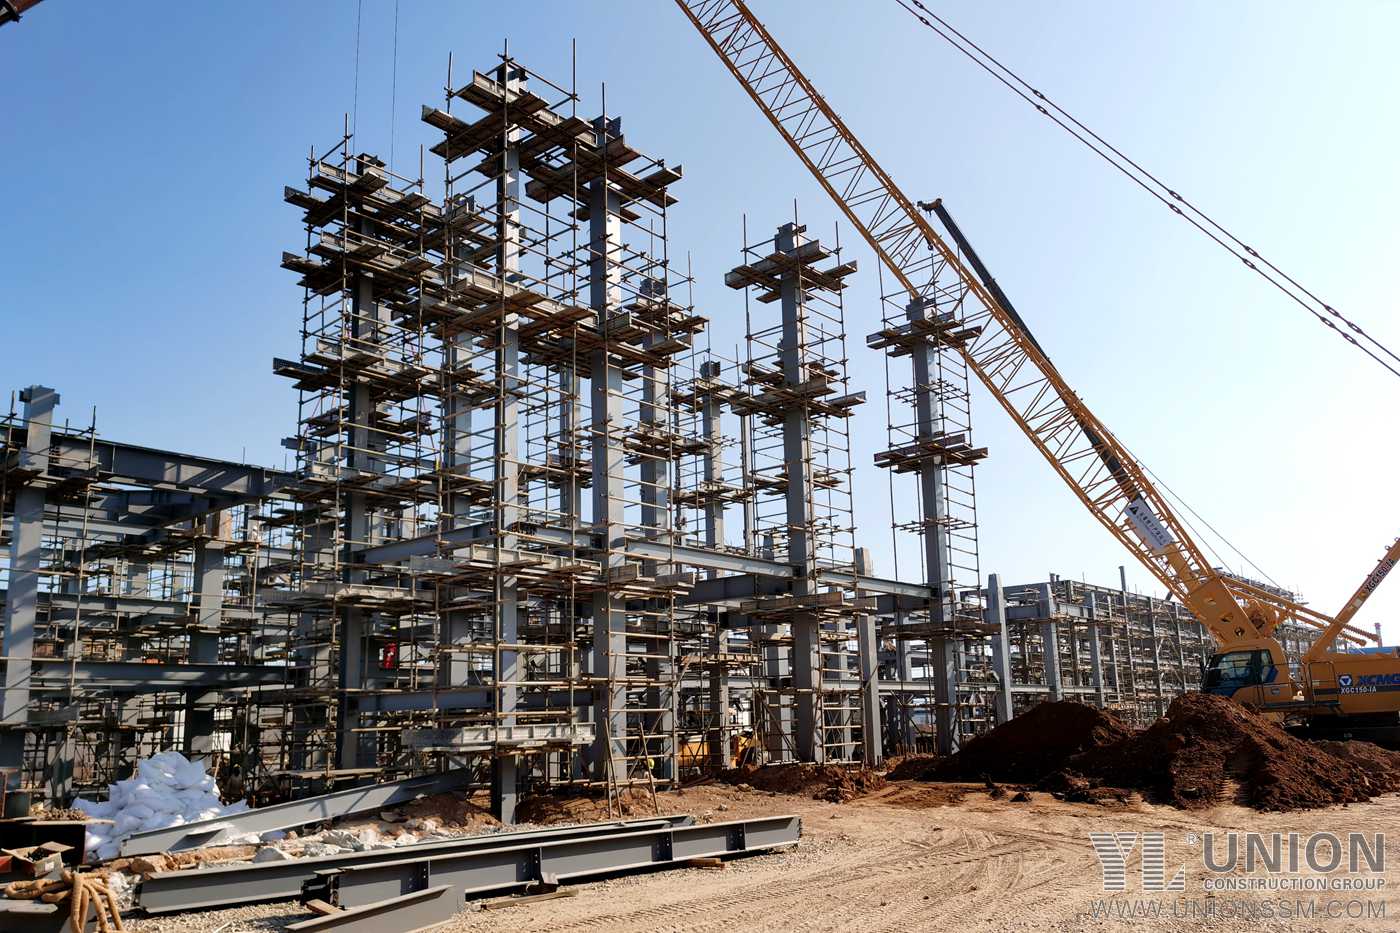 Fabrication and Erection for Steel Platforms with an Annual Output of 150,000 Tons of Maleic Anhydride